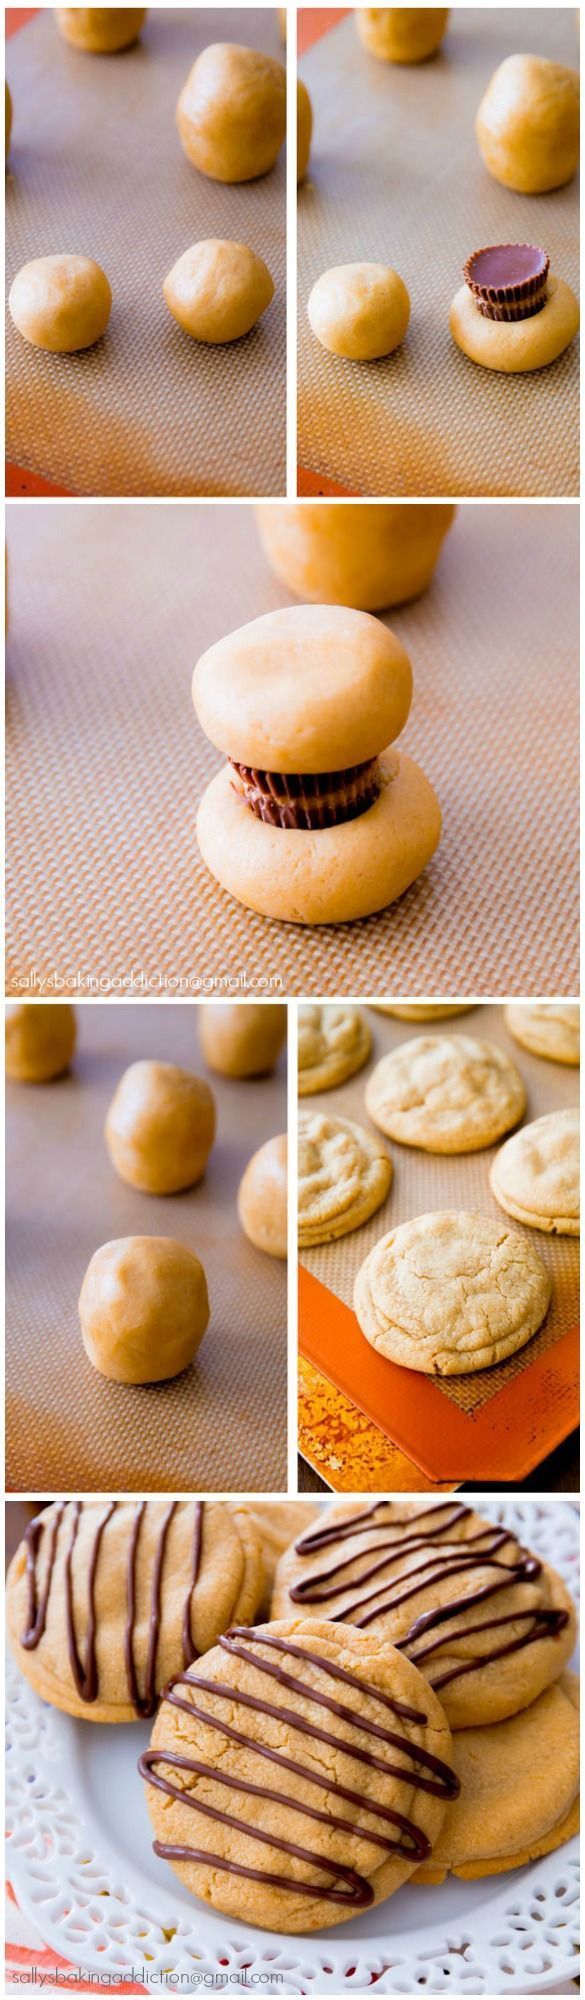 Reeses Stuffed Peanut Butter Cookies. Oh BOY! @Lori Bearden Bearden Wood can you PLEASE make these for Easter?